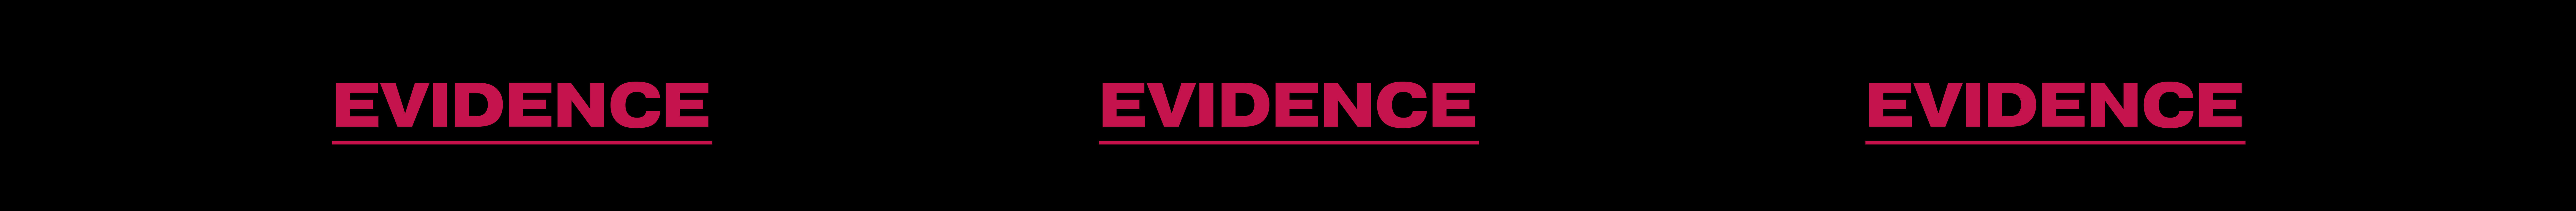 EVIDENCE EVIDENCE's profile banner